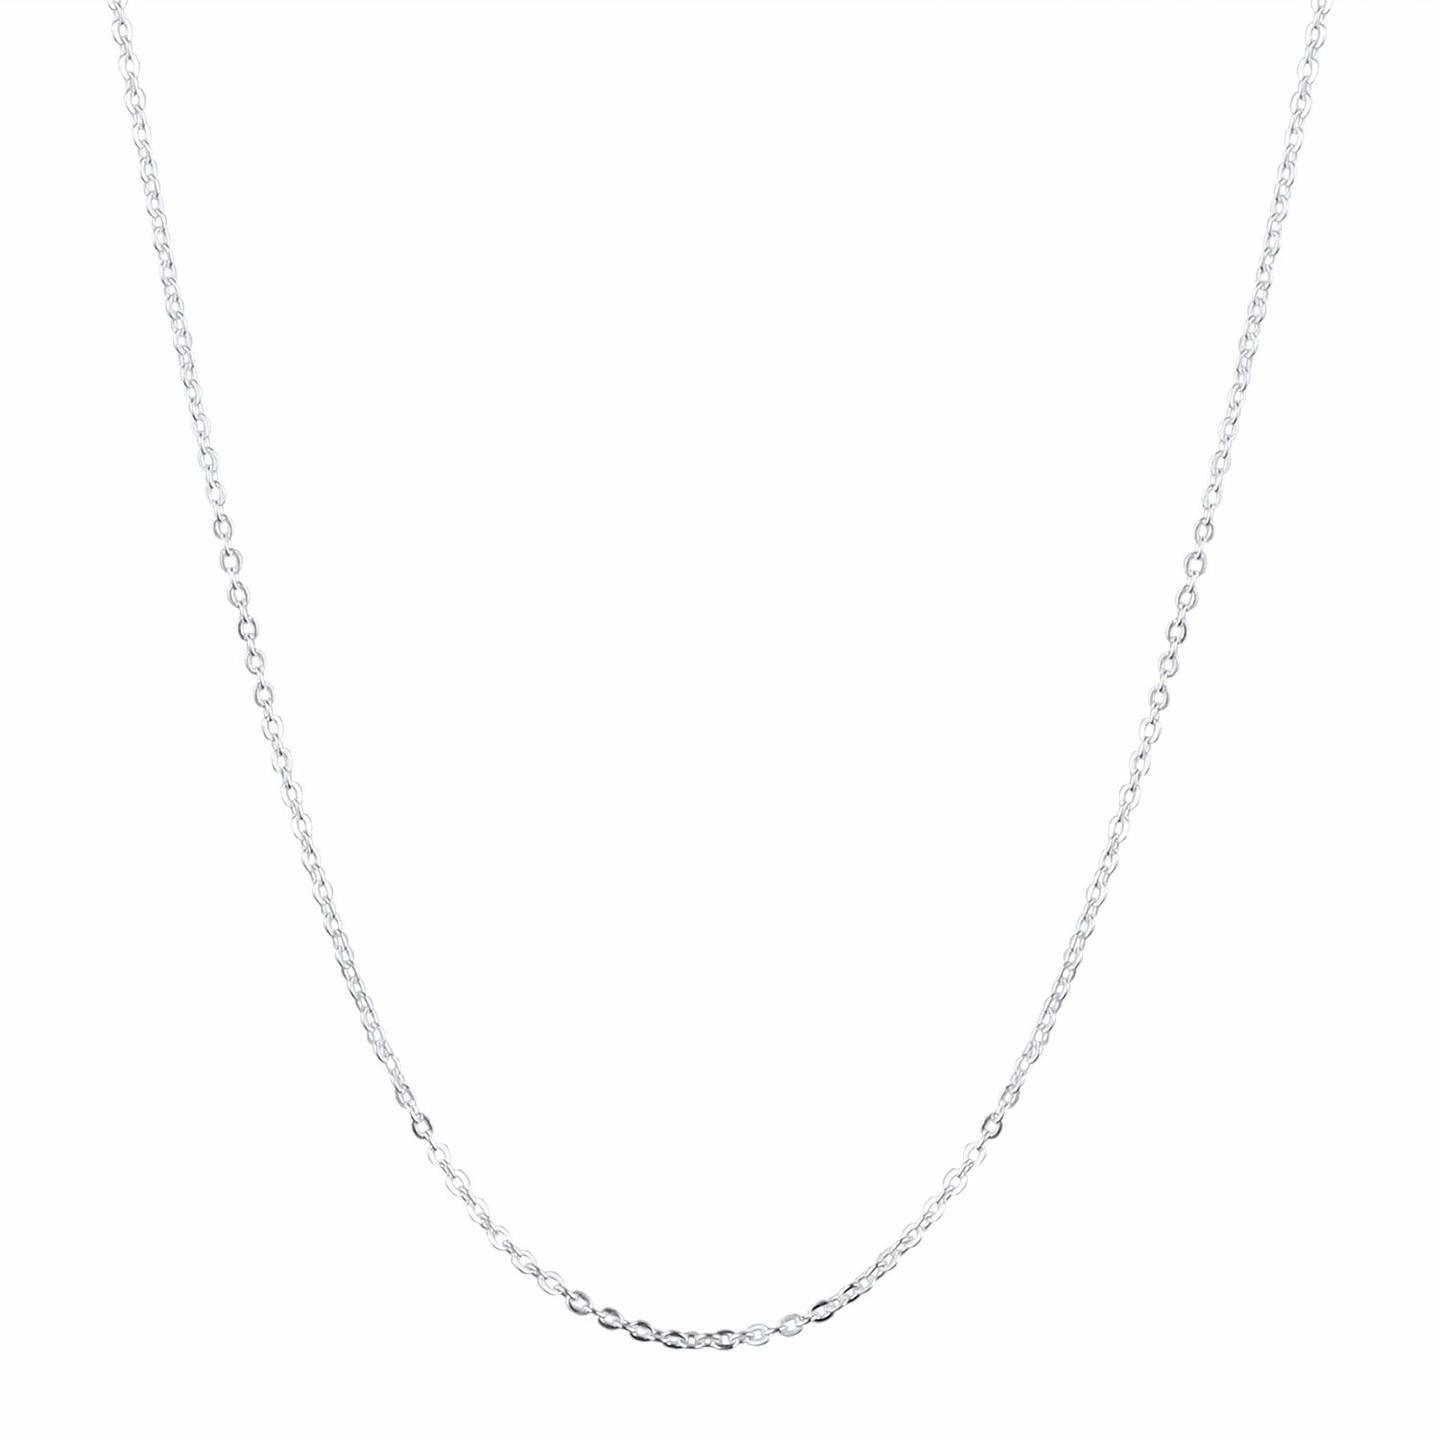 Nemichand Jewels Sterling Silver 925 Thin Chain for Women & Men SS-12